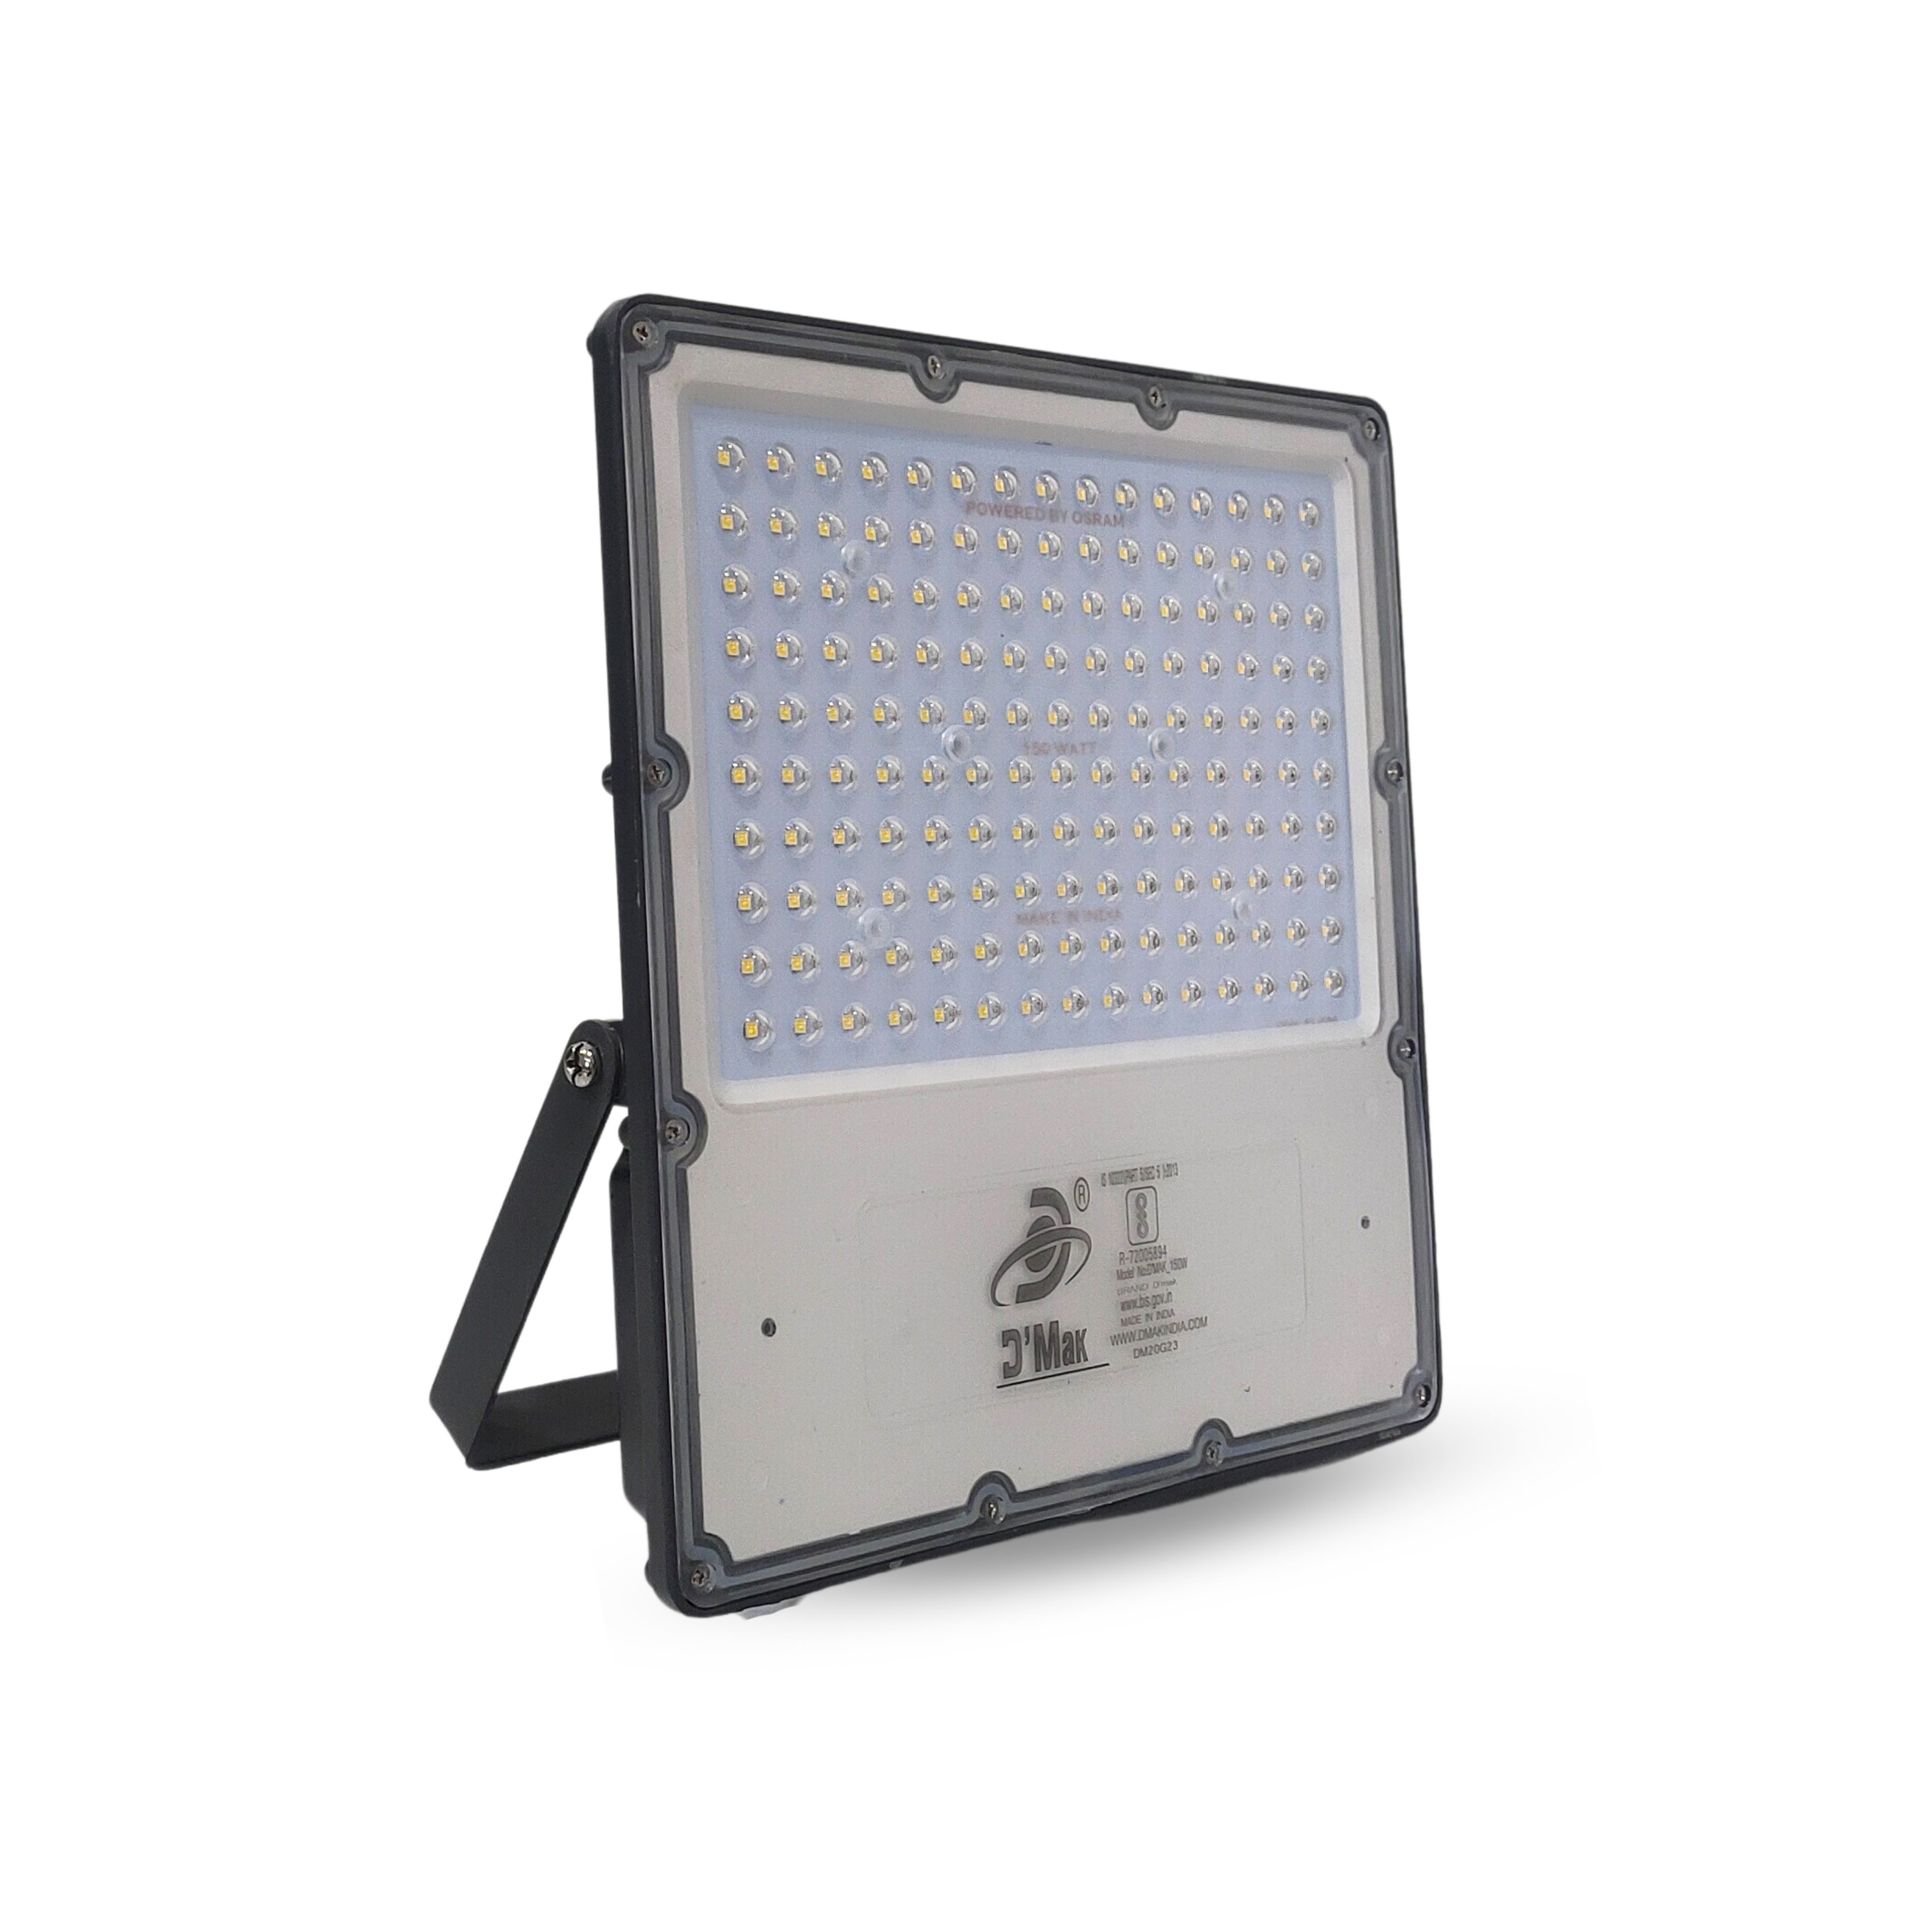 150 Watt LED Flood Light With Lens White Body Waterproof IP65 for Outdoor Purposes